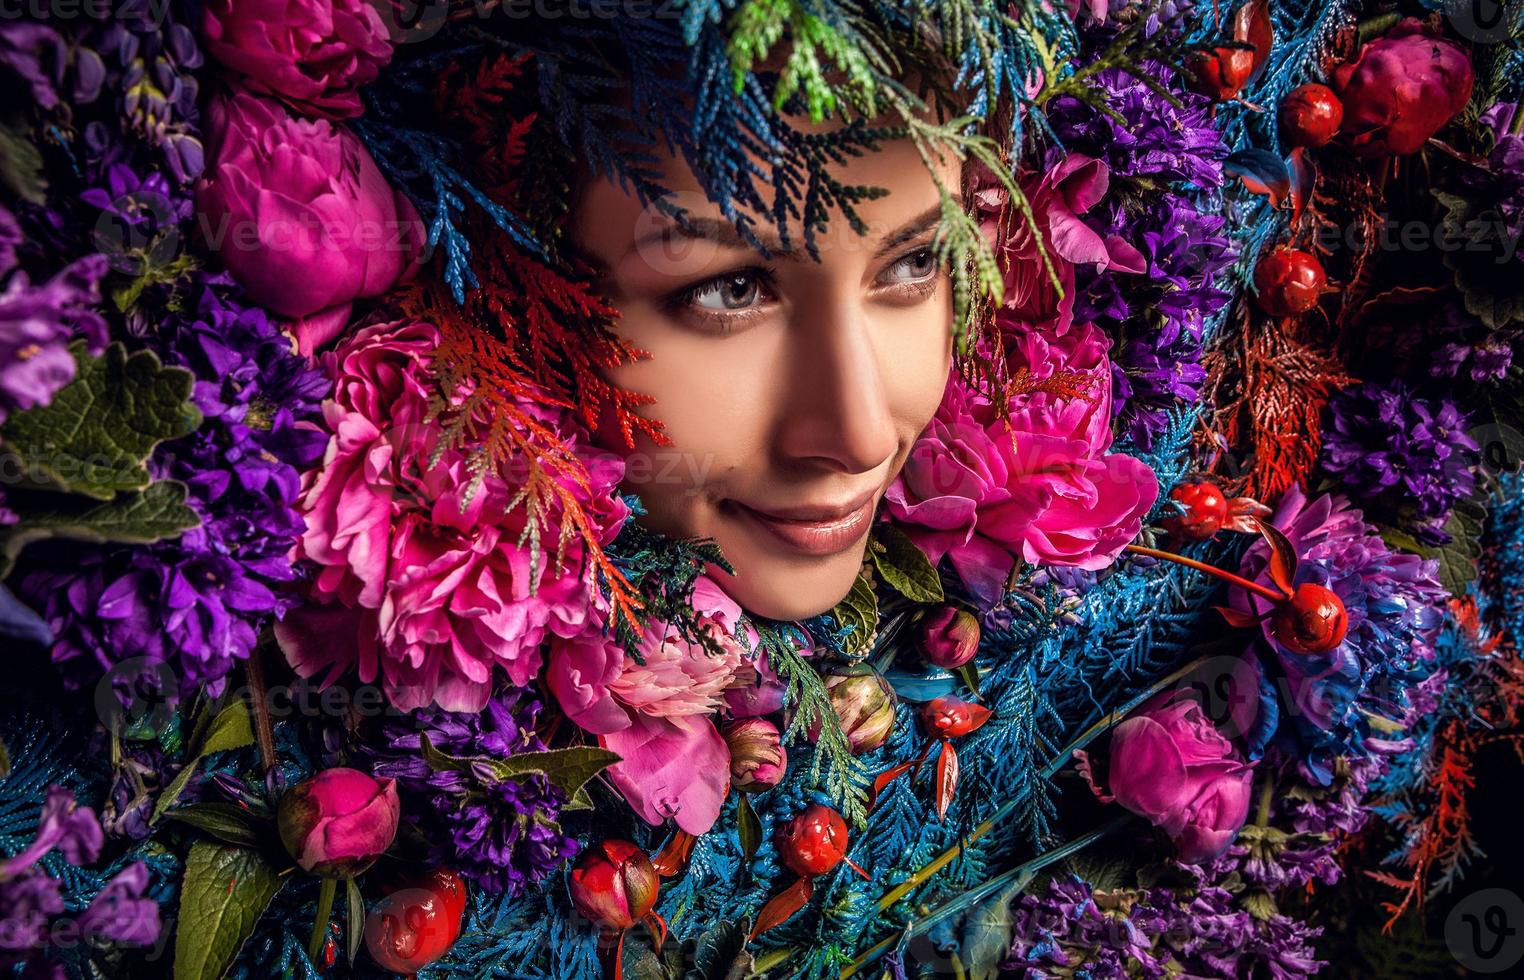 Fairy tale girl portrait surrounded with natural plants and flowers. photo